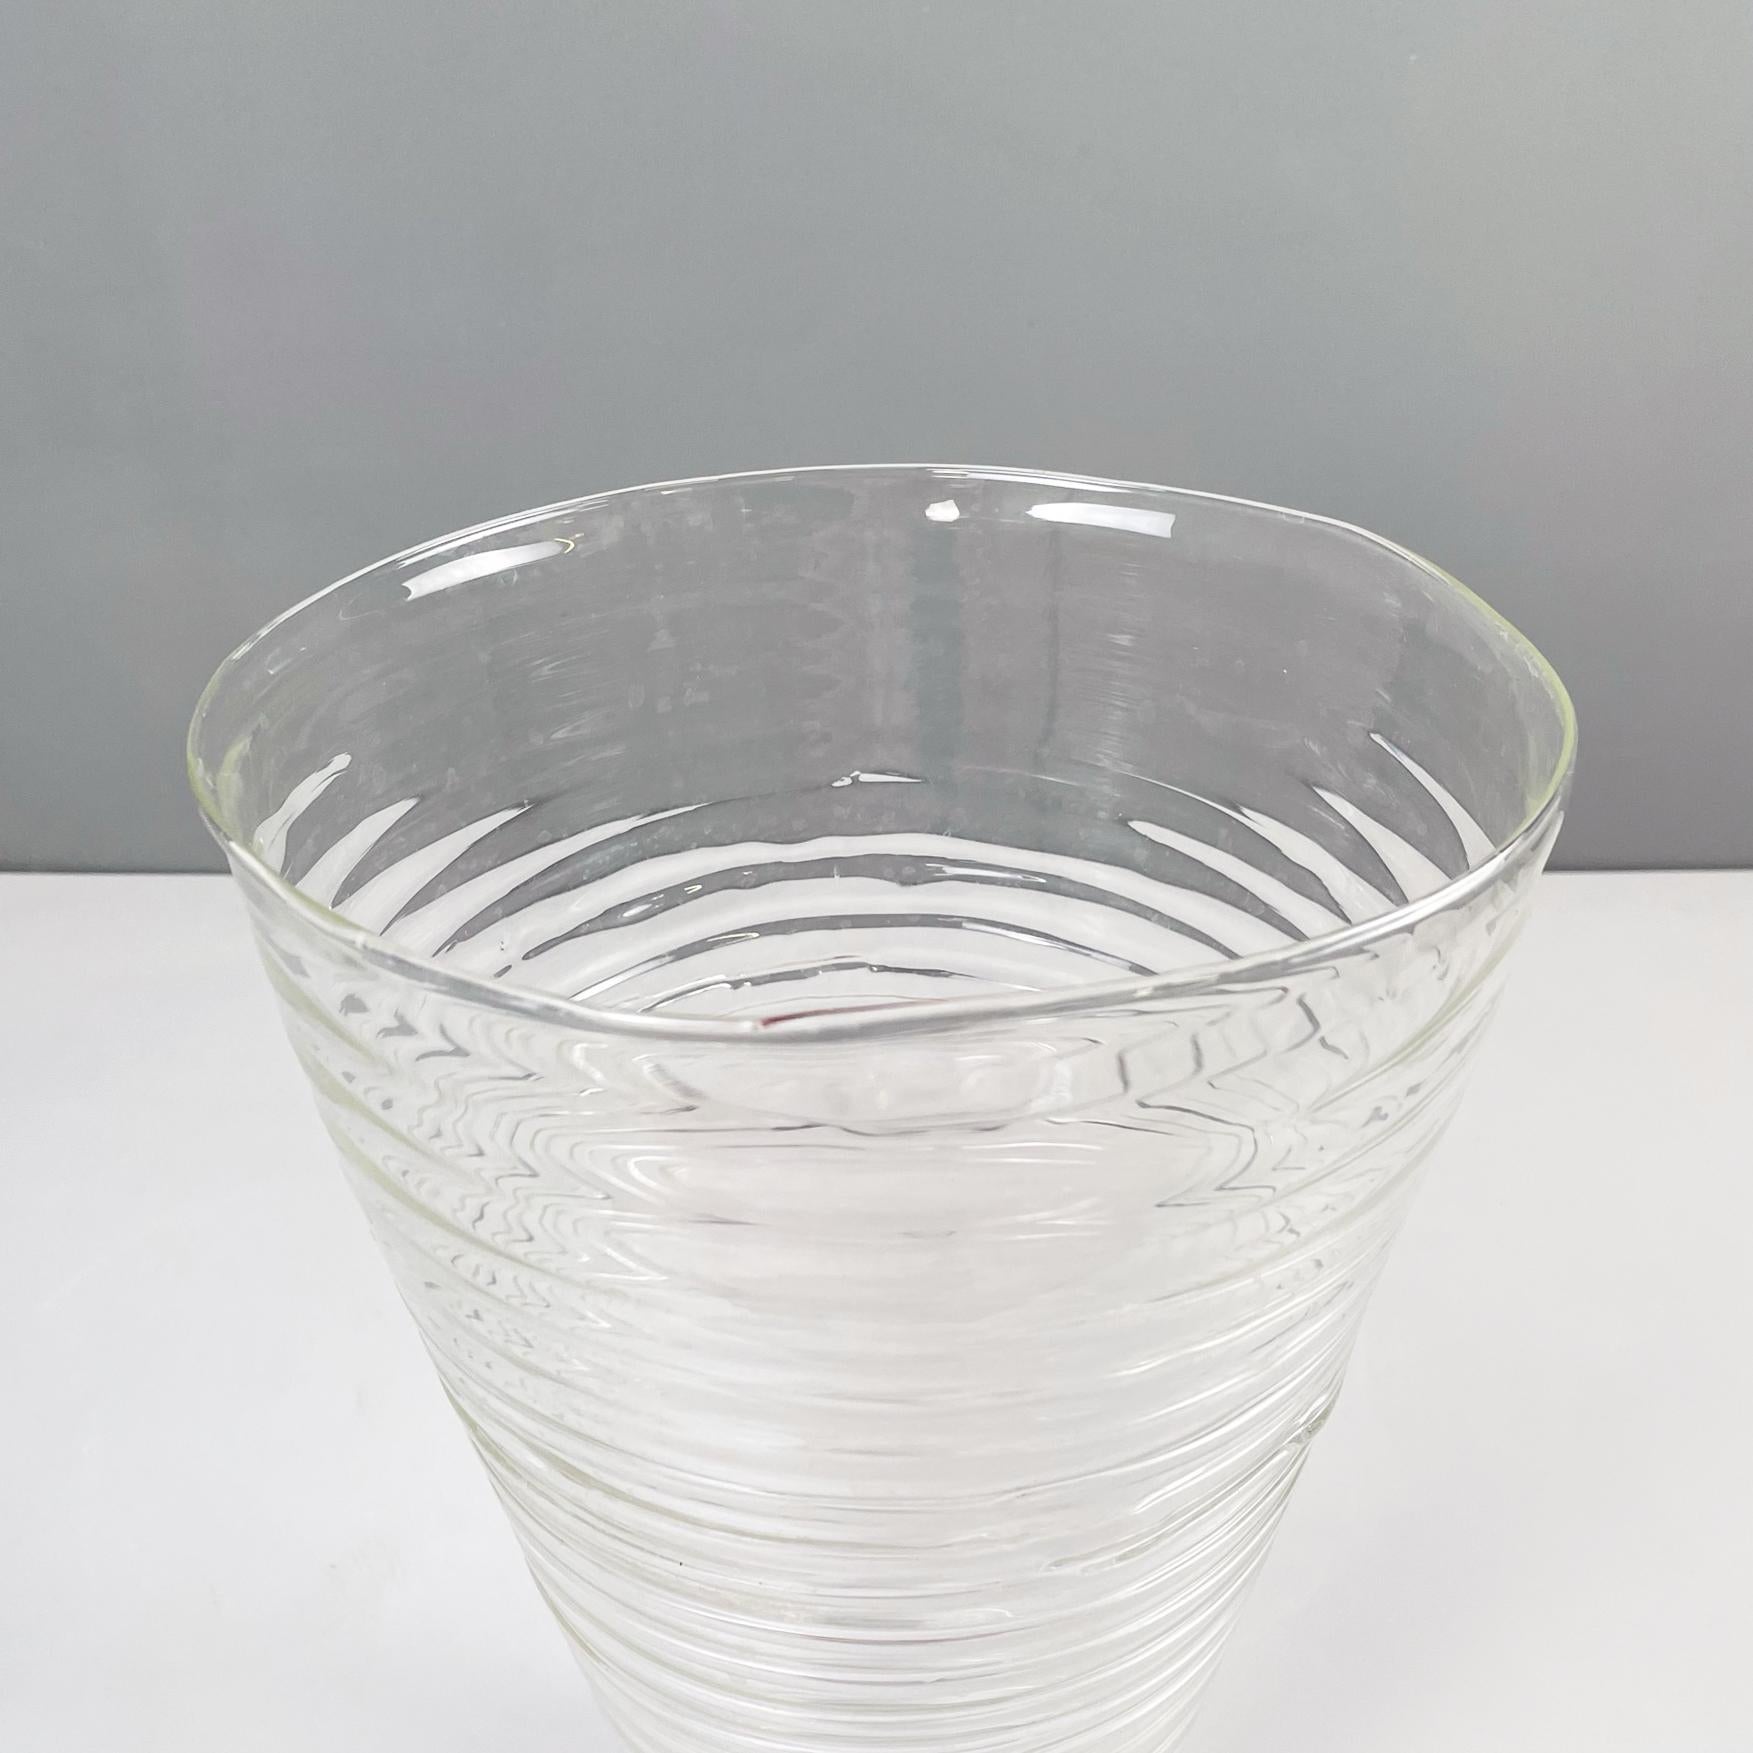 Modern Italian modern Glass vase with round shape and spiral by Roberto Faccioli, 1990s For Sale